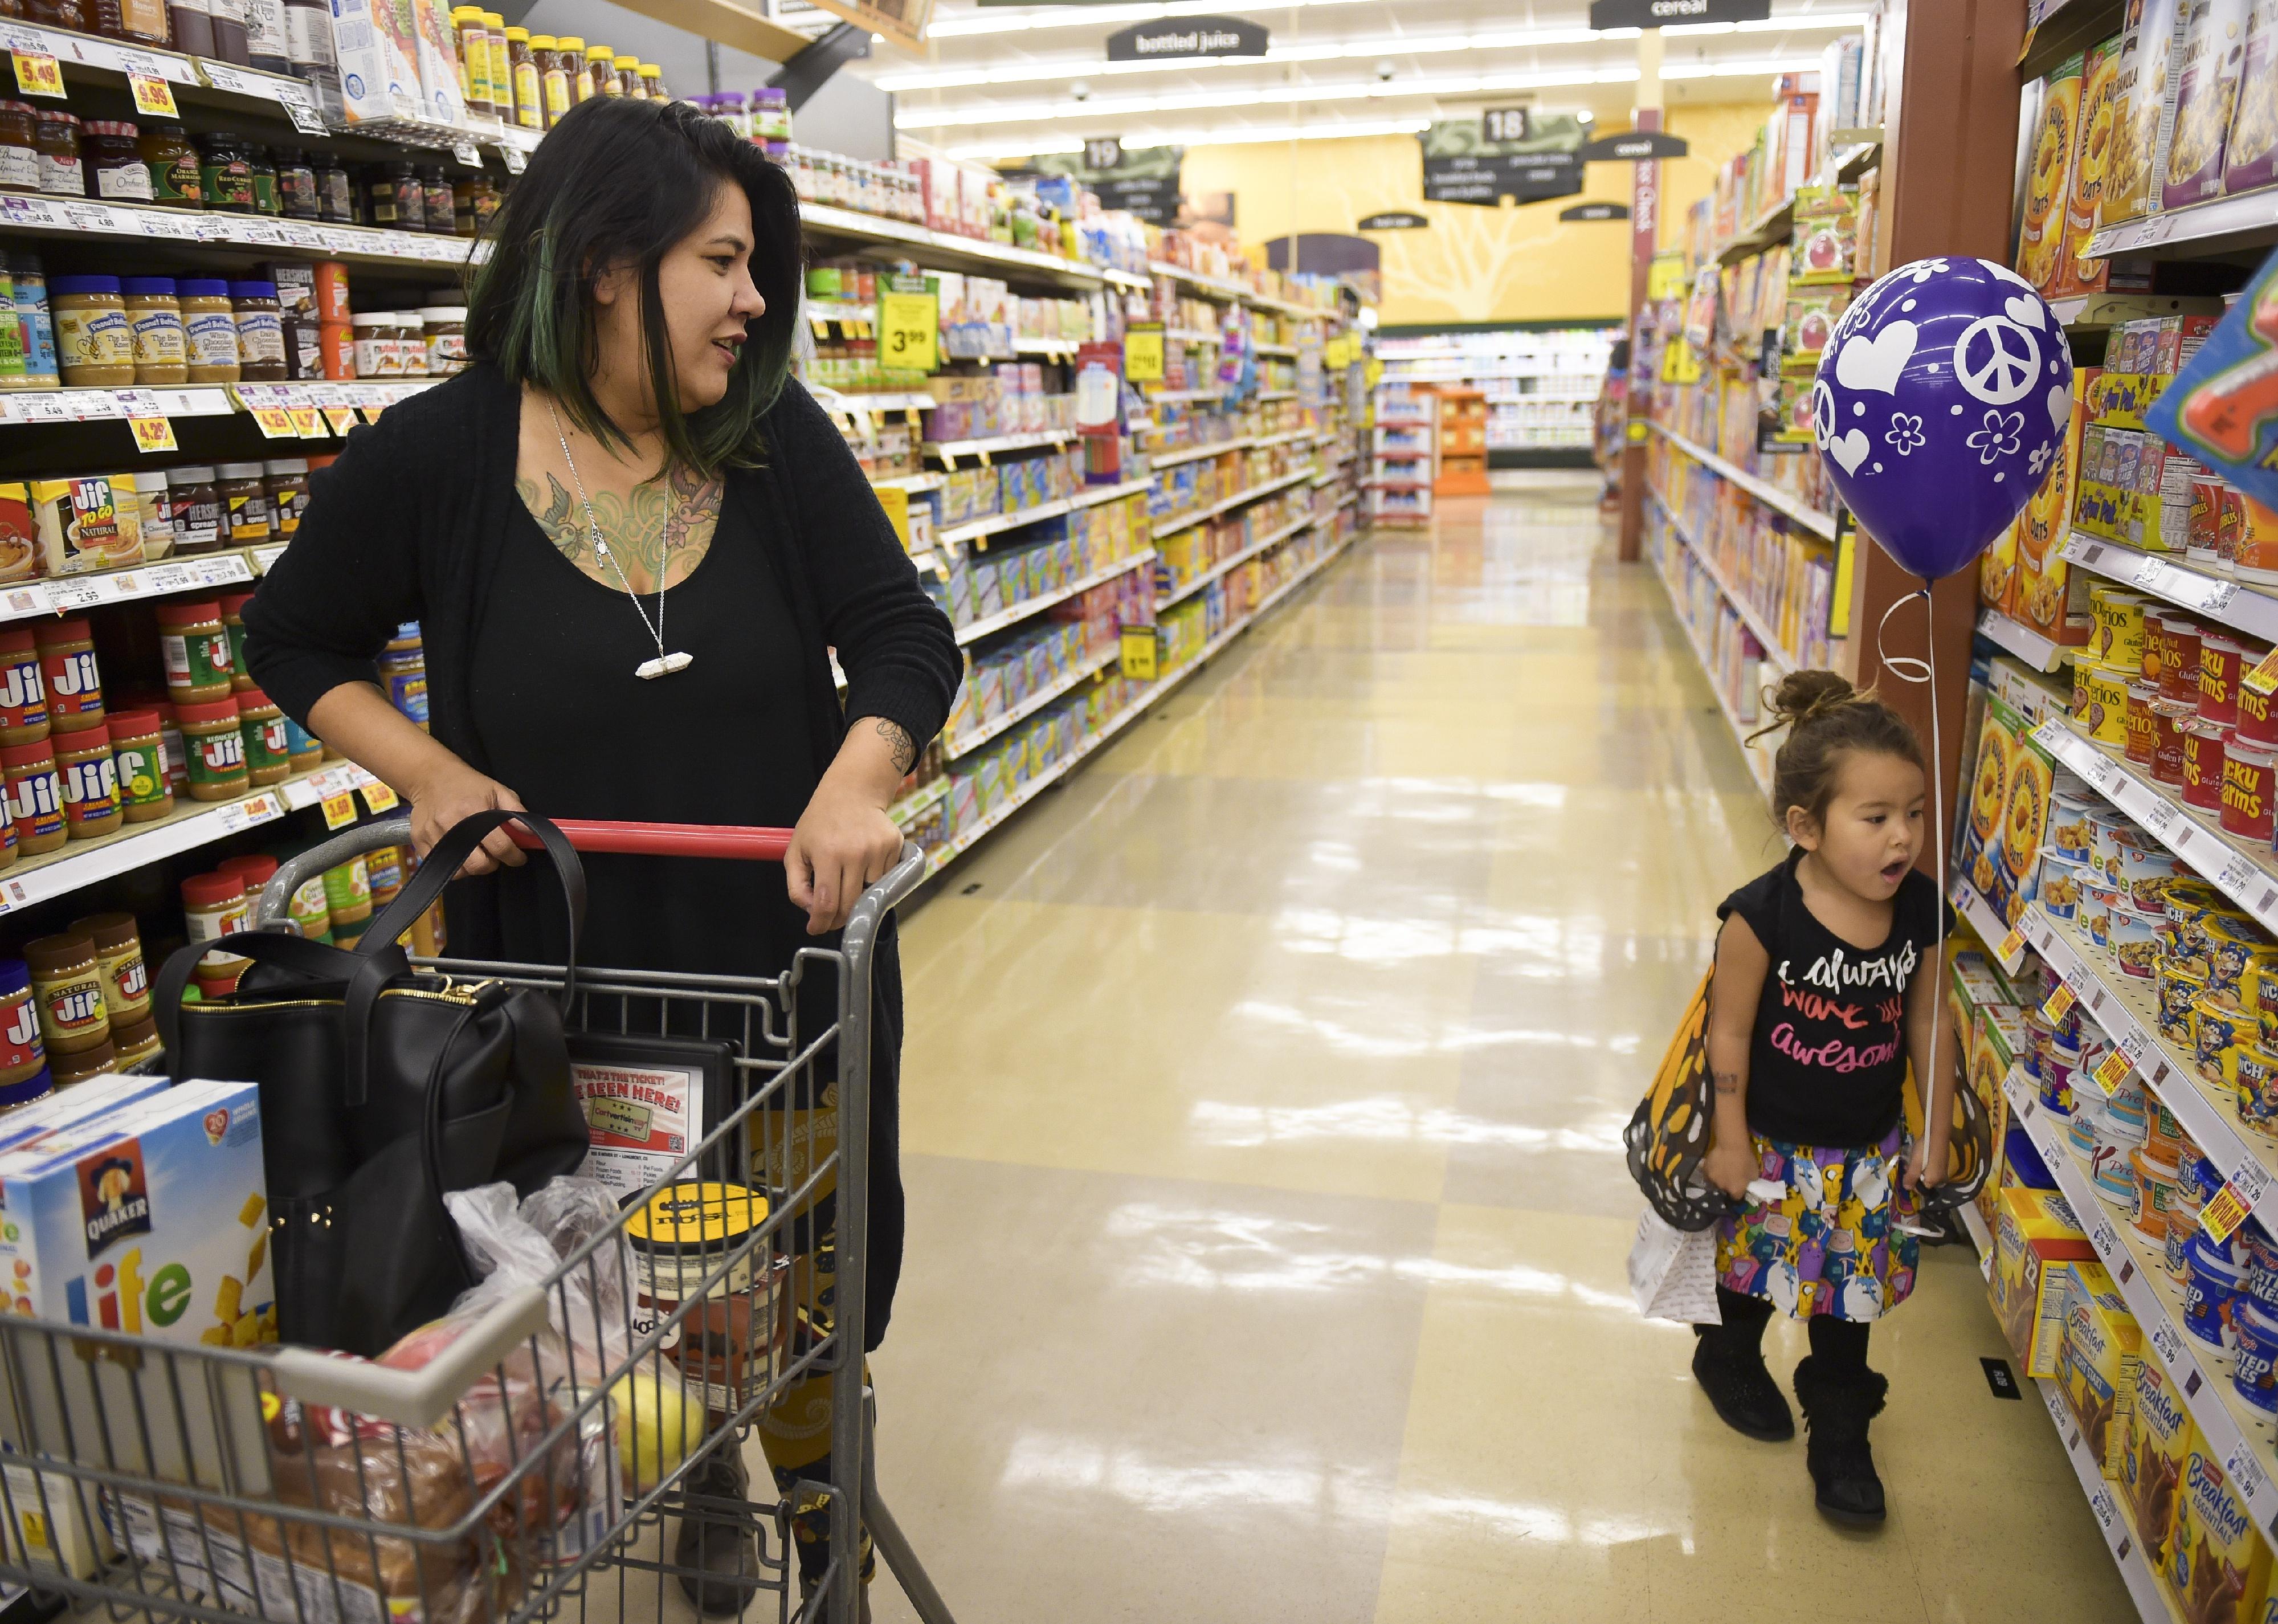 A woman pushes a grocery cart next to a little girl holding a purple balloon in the grocery store.